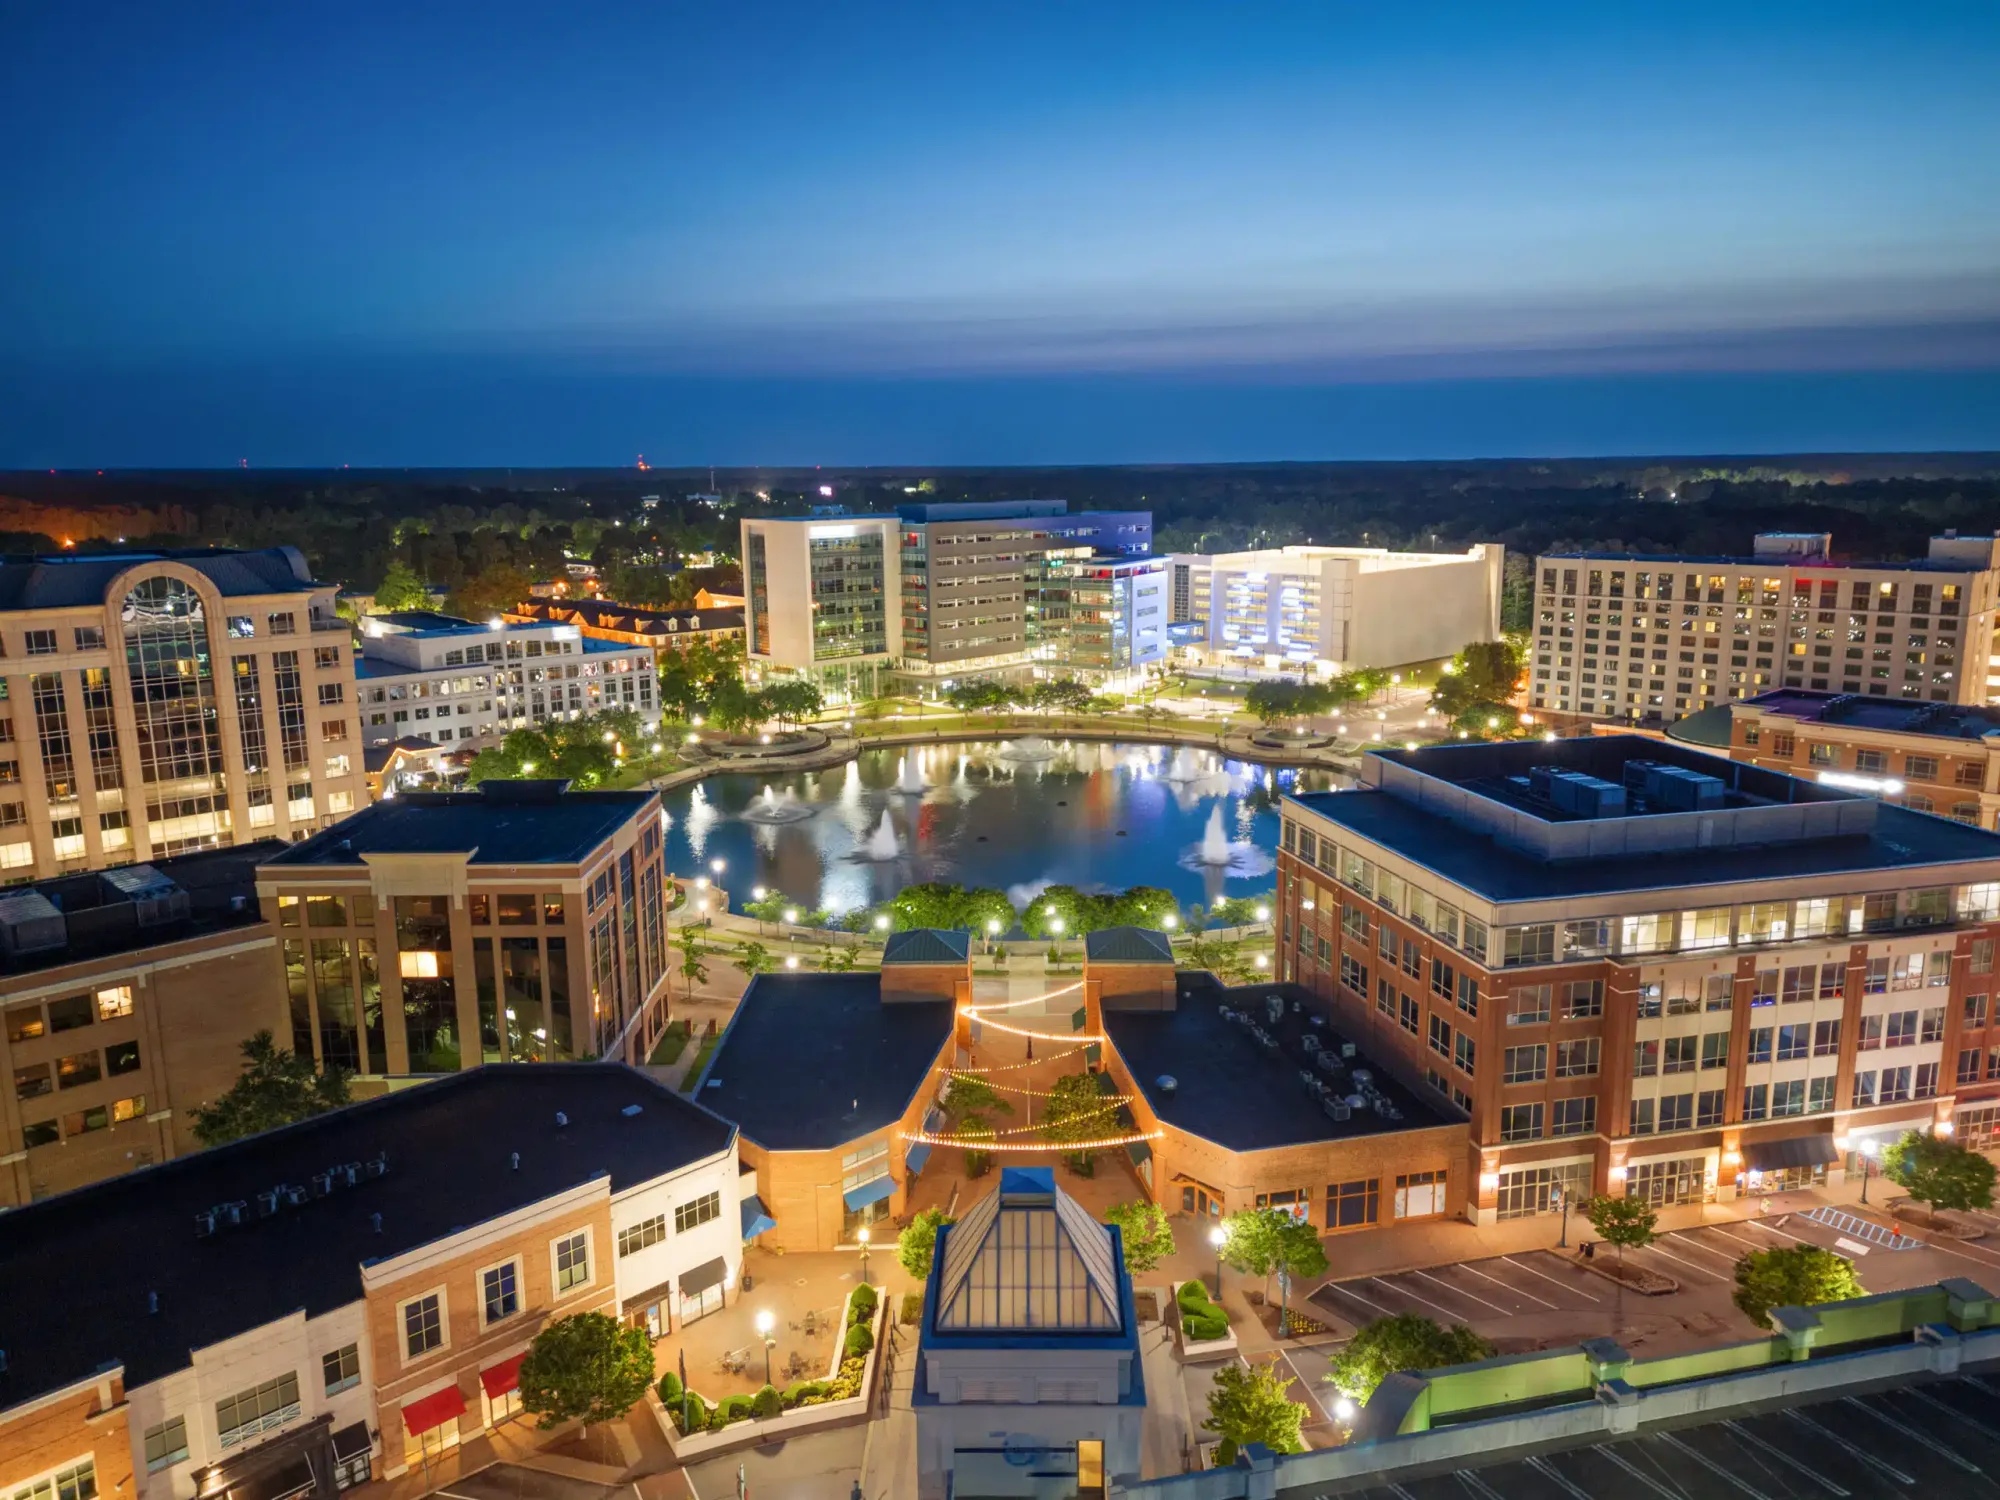 Is Newport News a Good Place to Live?